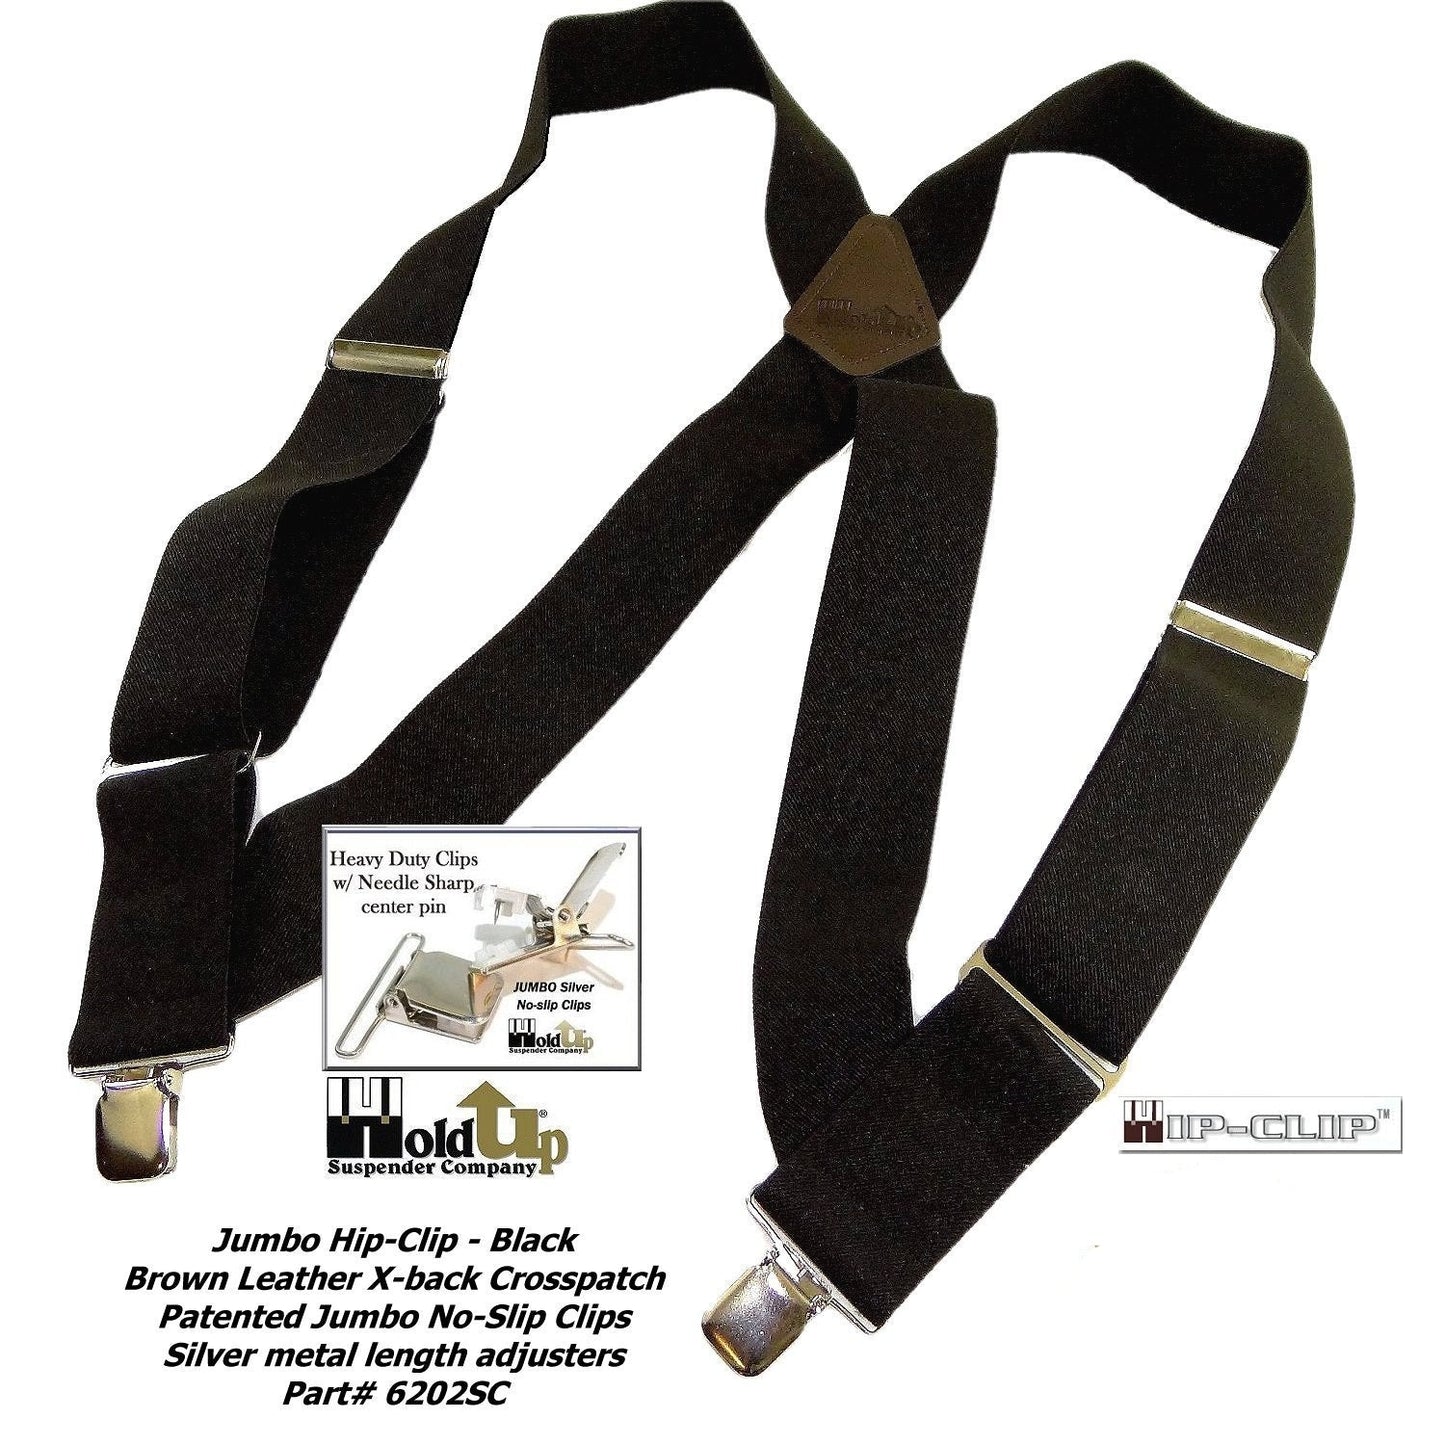 Black Heavy Duty Trucker Style 2" Wide Hip-Clip Suspenders with USA Patented silver tone no-slip jumbo clips